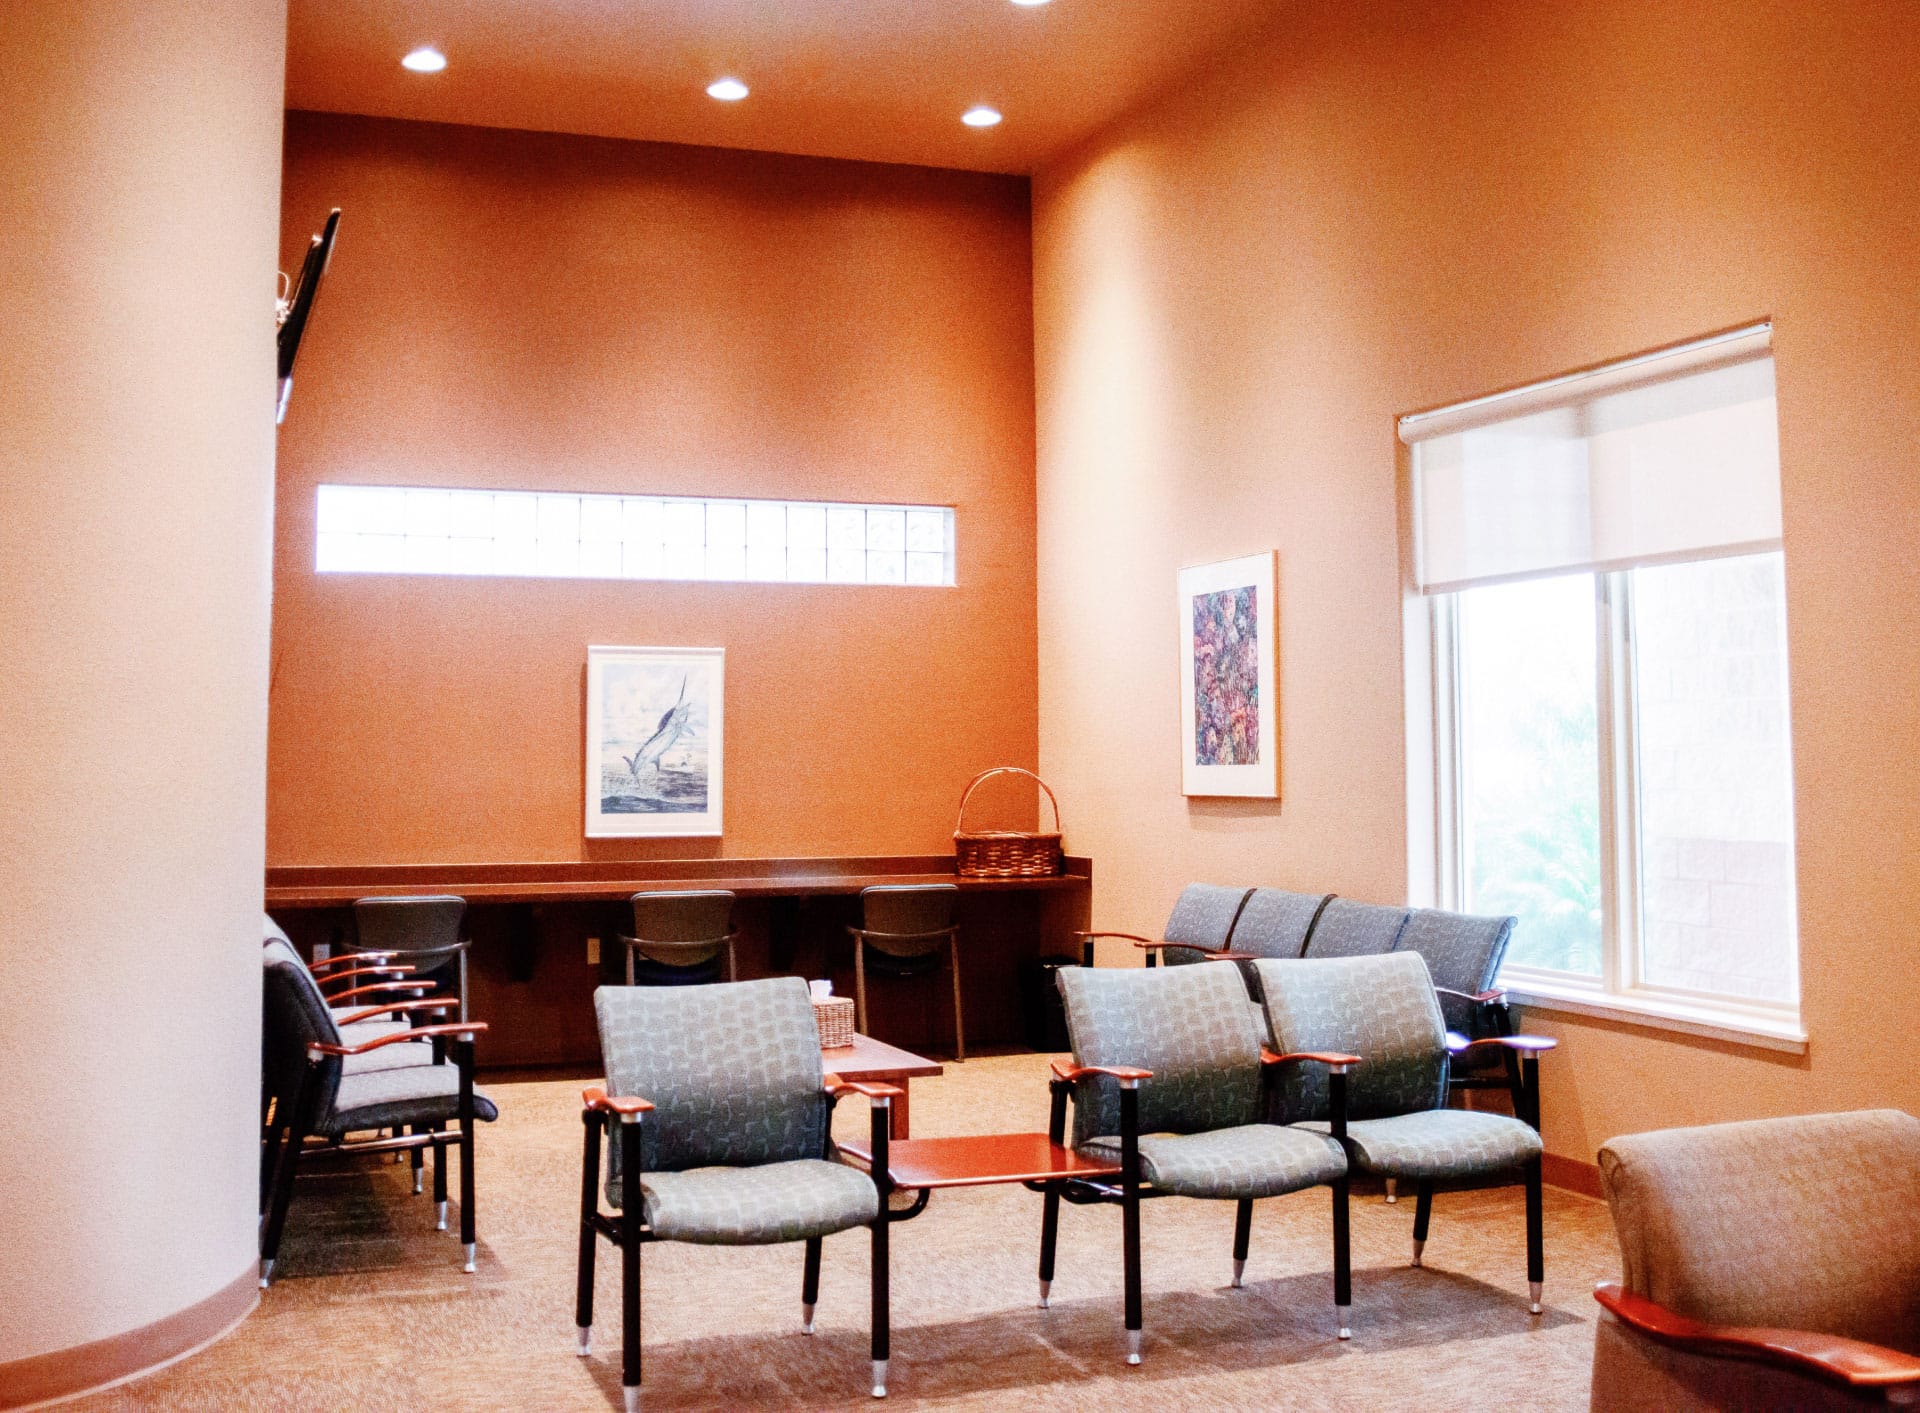 Office reception and front desk area with orange walls and gray chairs